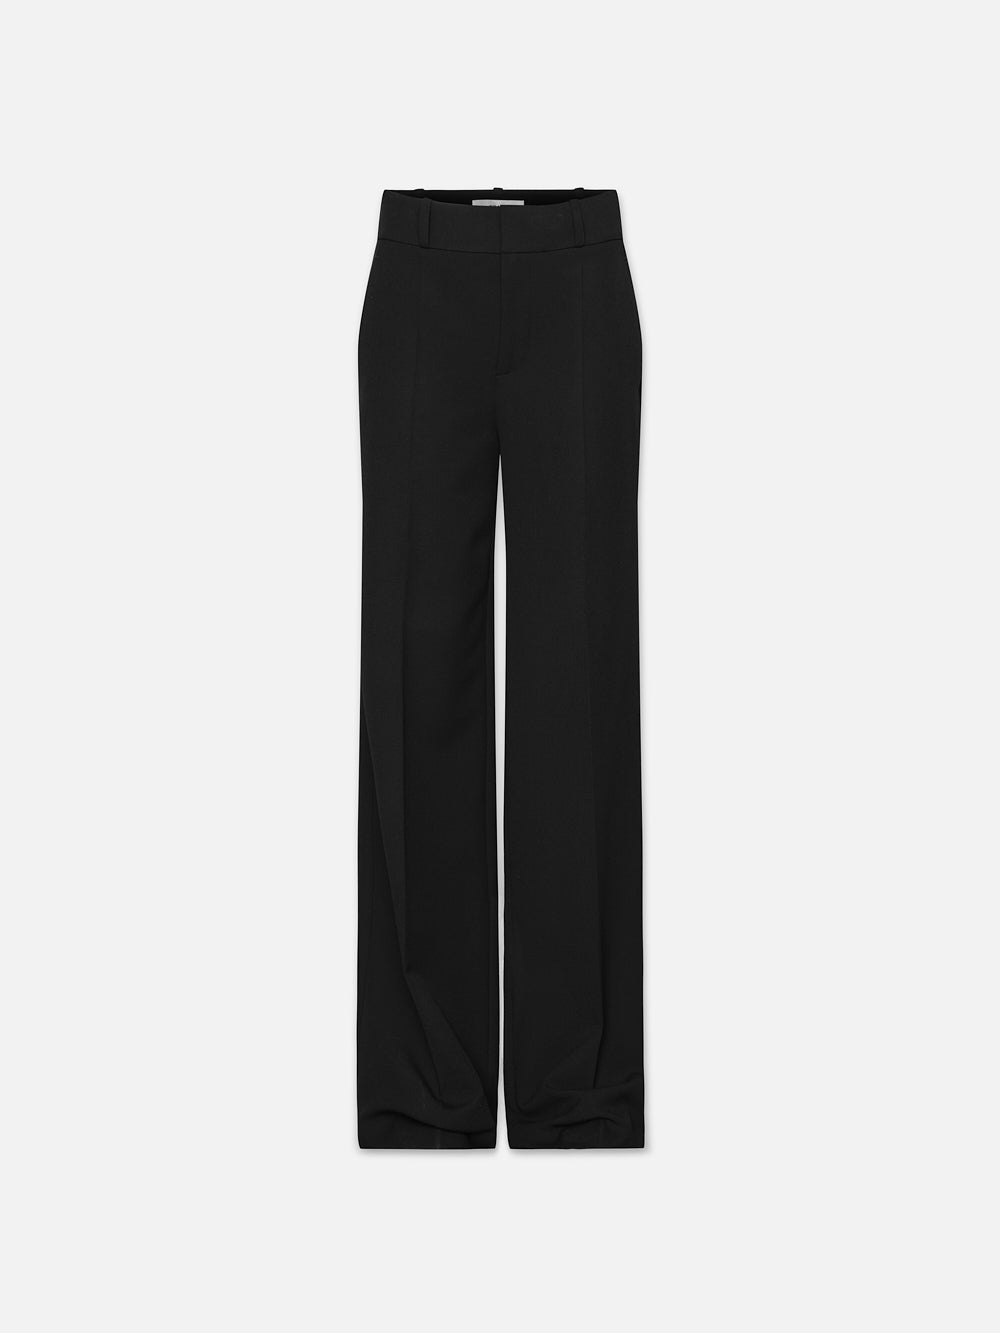 Relaxed Trouser in Black - 1